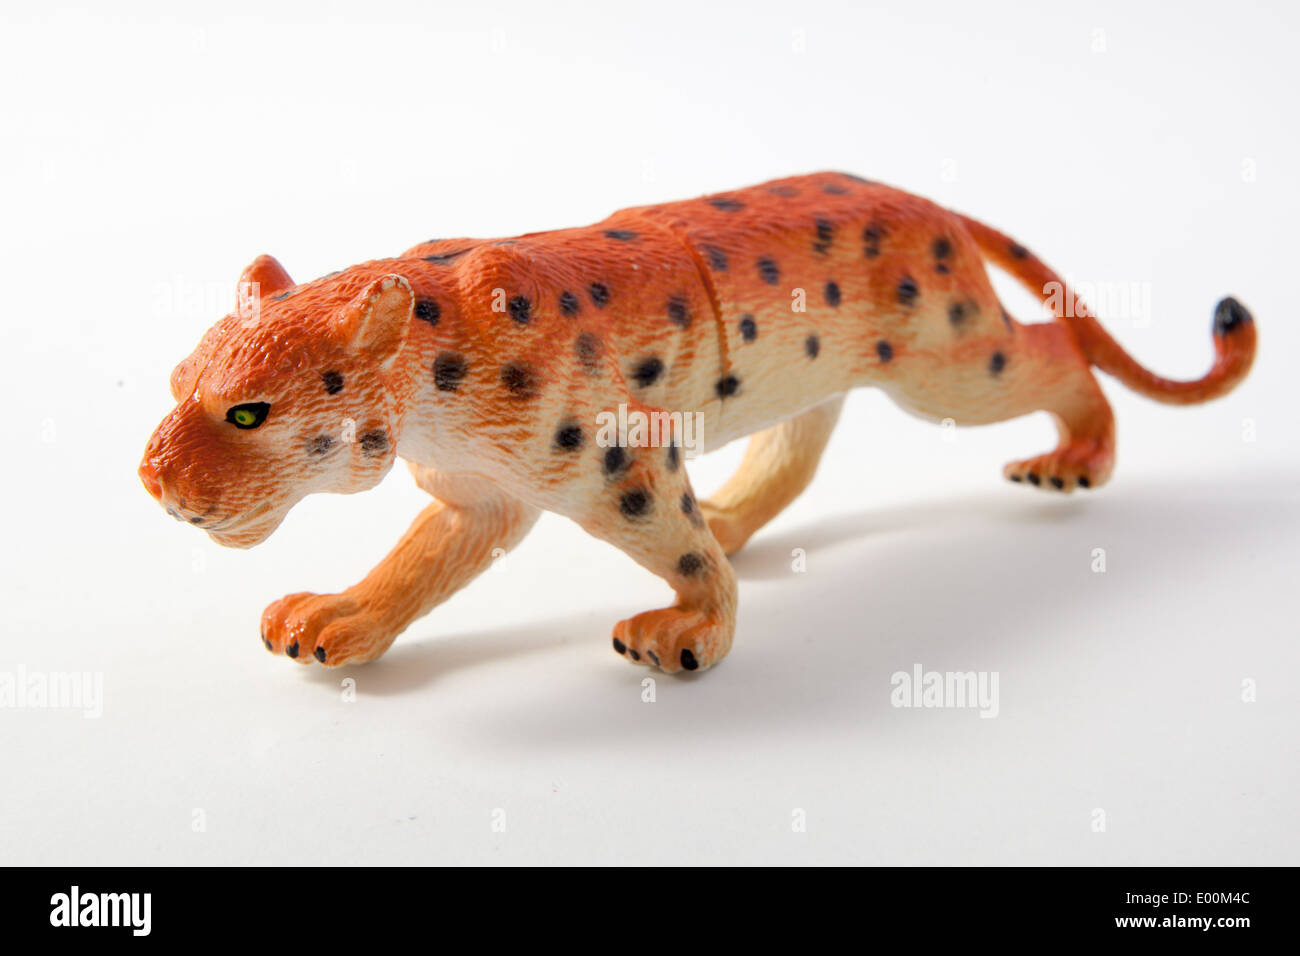 Plastic toys and figures from a play set, dinosaurs, farm animals and zoo  animals Stock Photo - Alamy